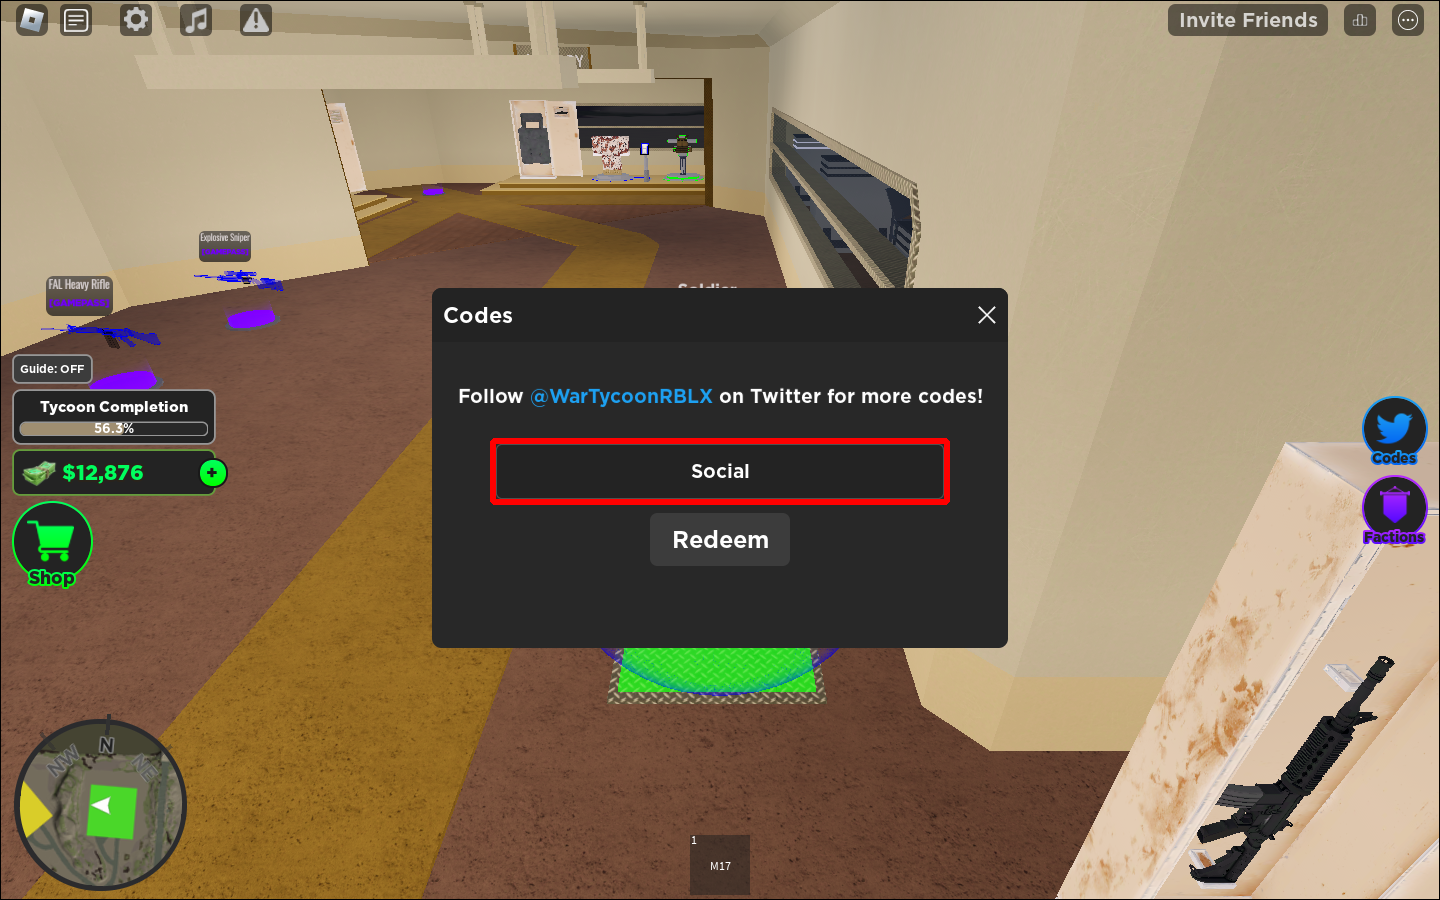 5 best weapons to use in Roblox War Tycoon